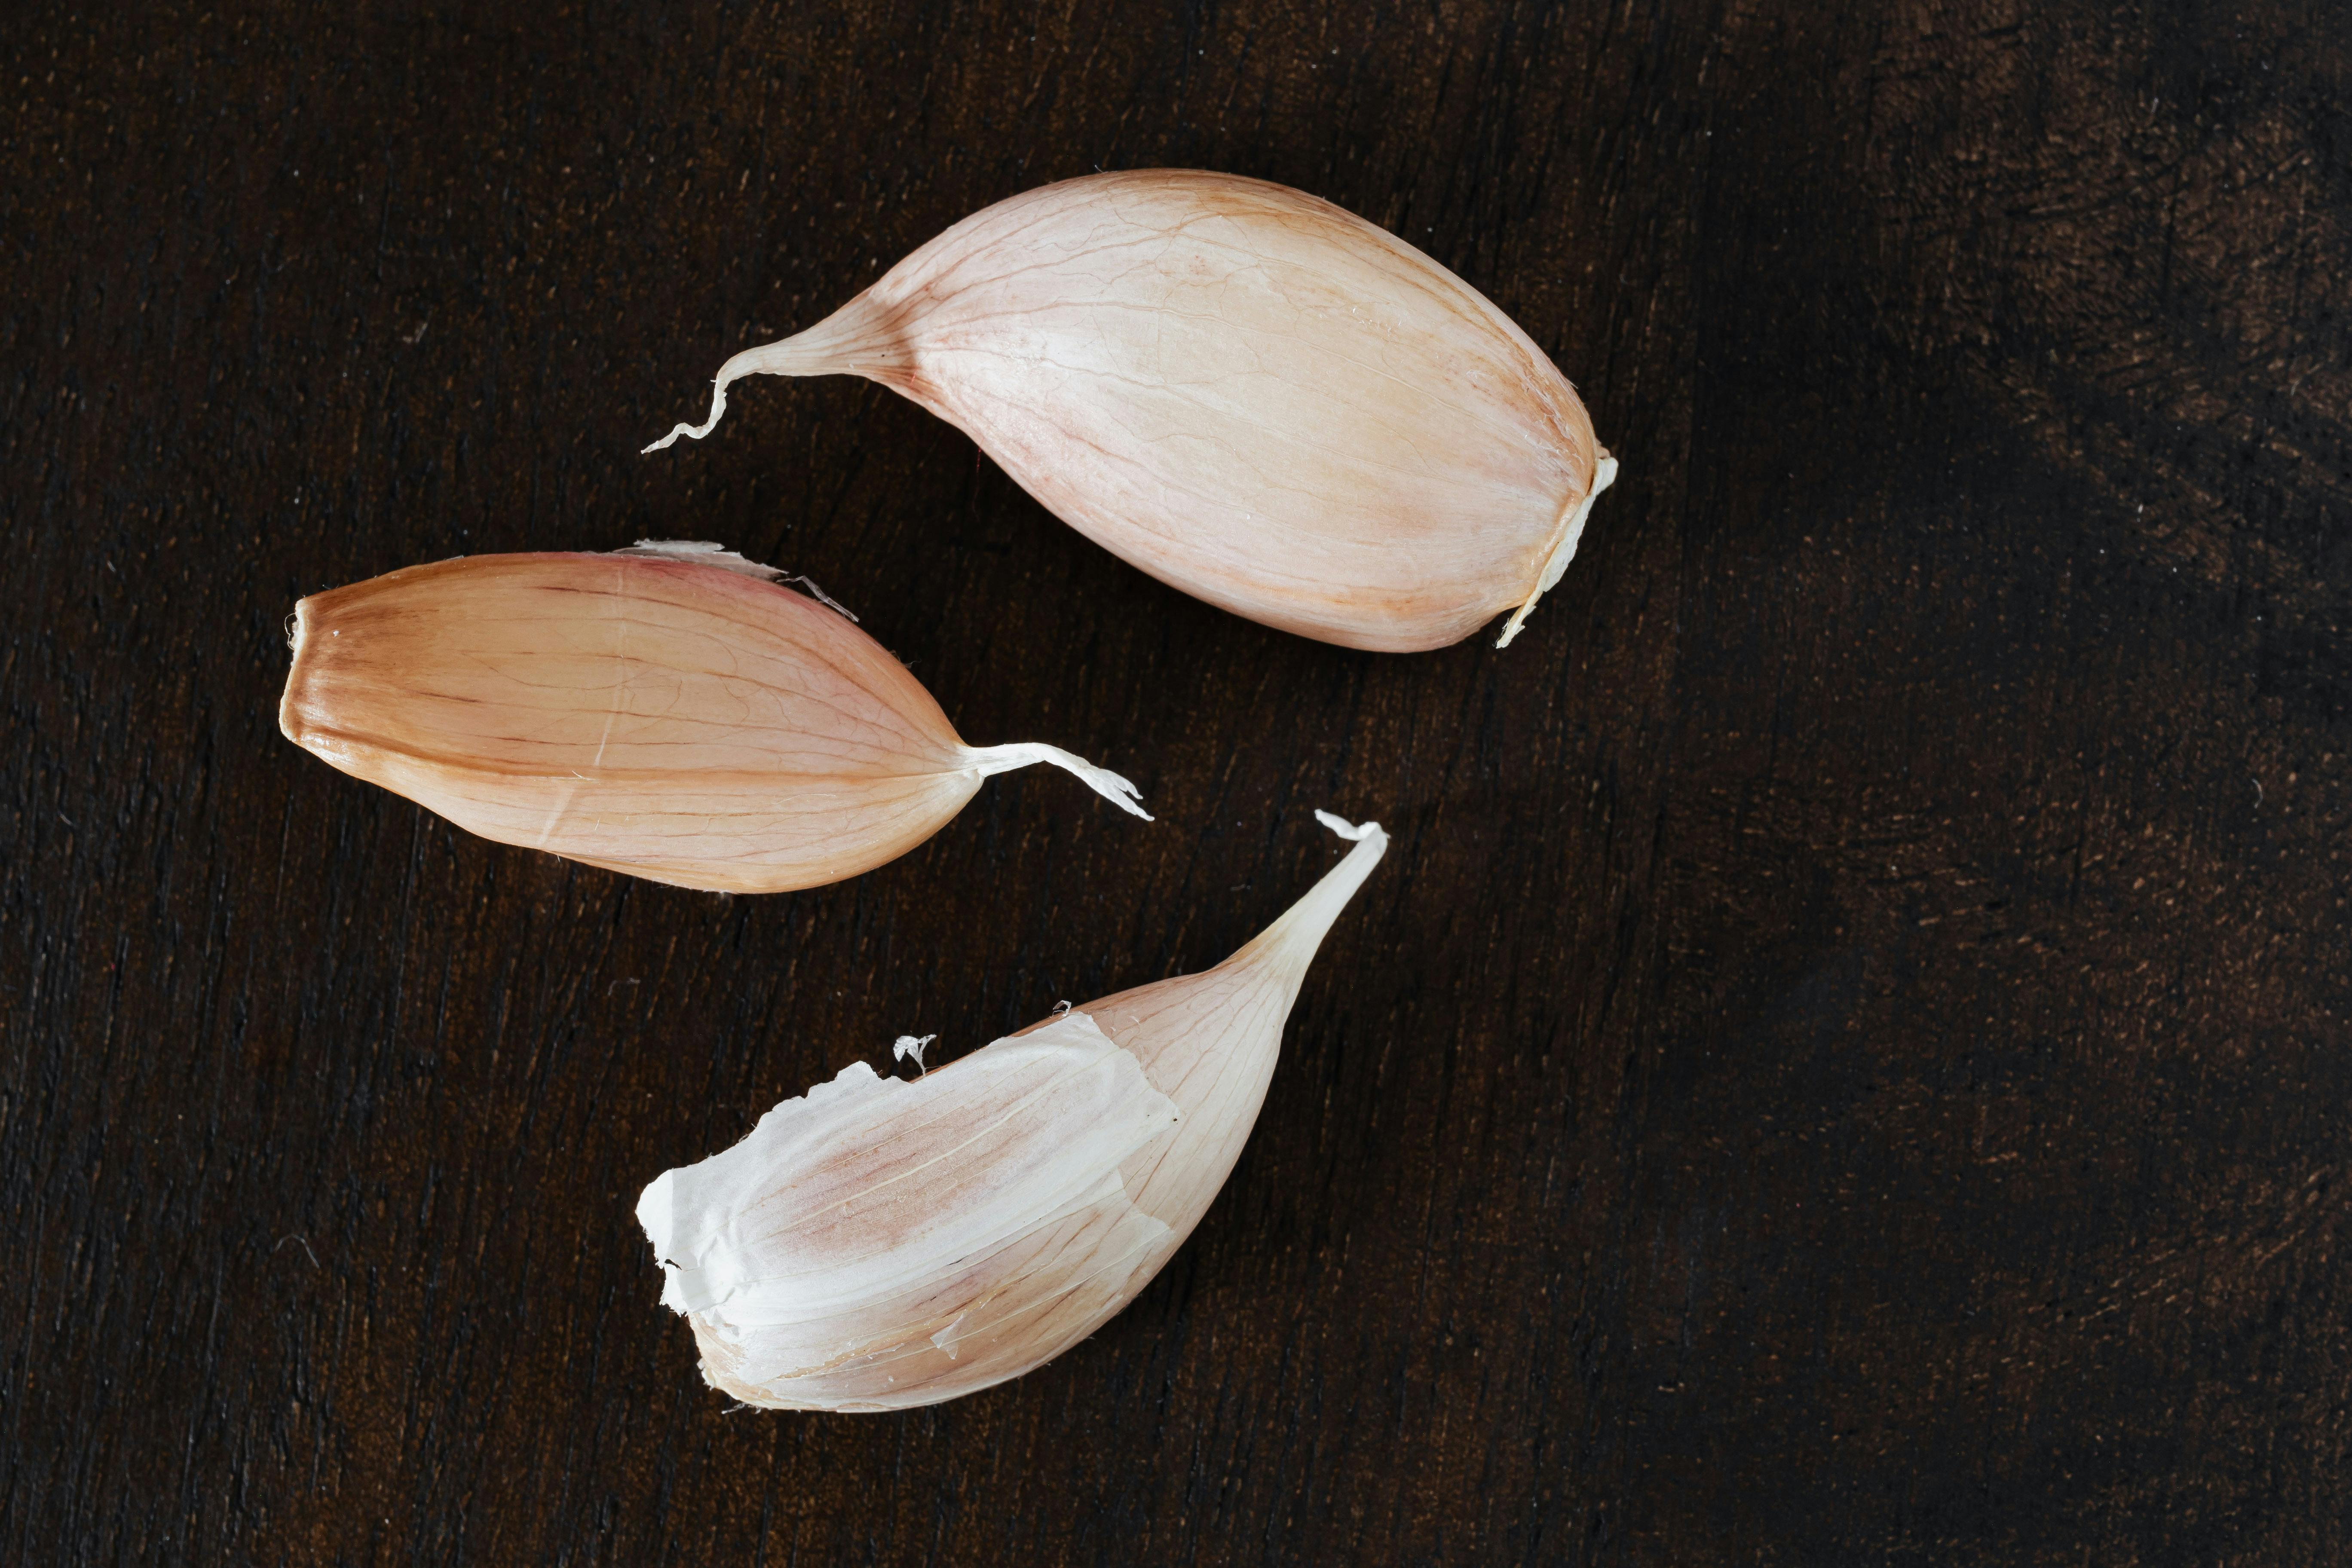 set of whole fresh cloves of garlic arranged on wooden tabletop in kitchen